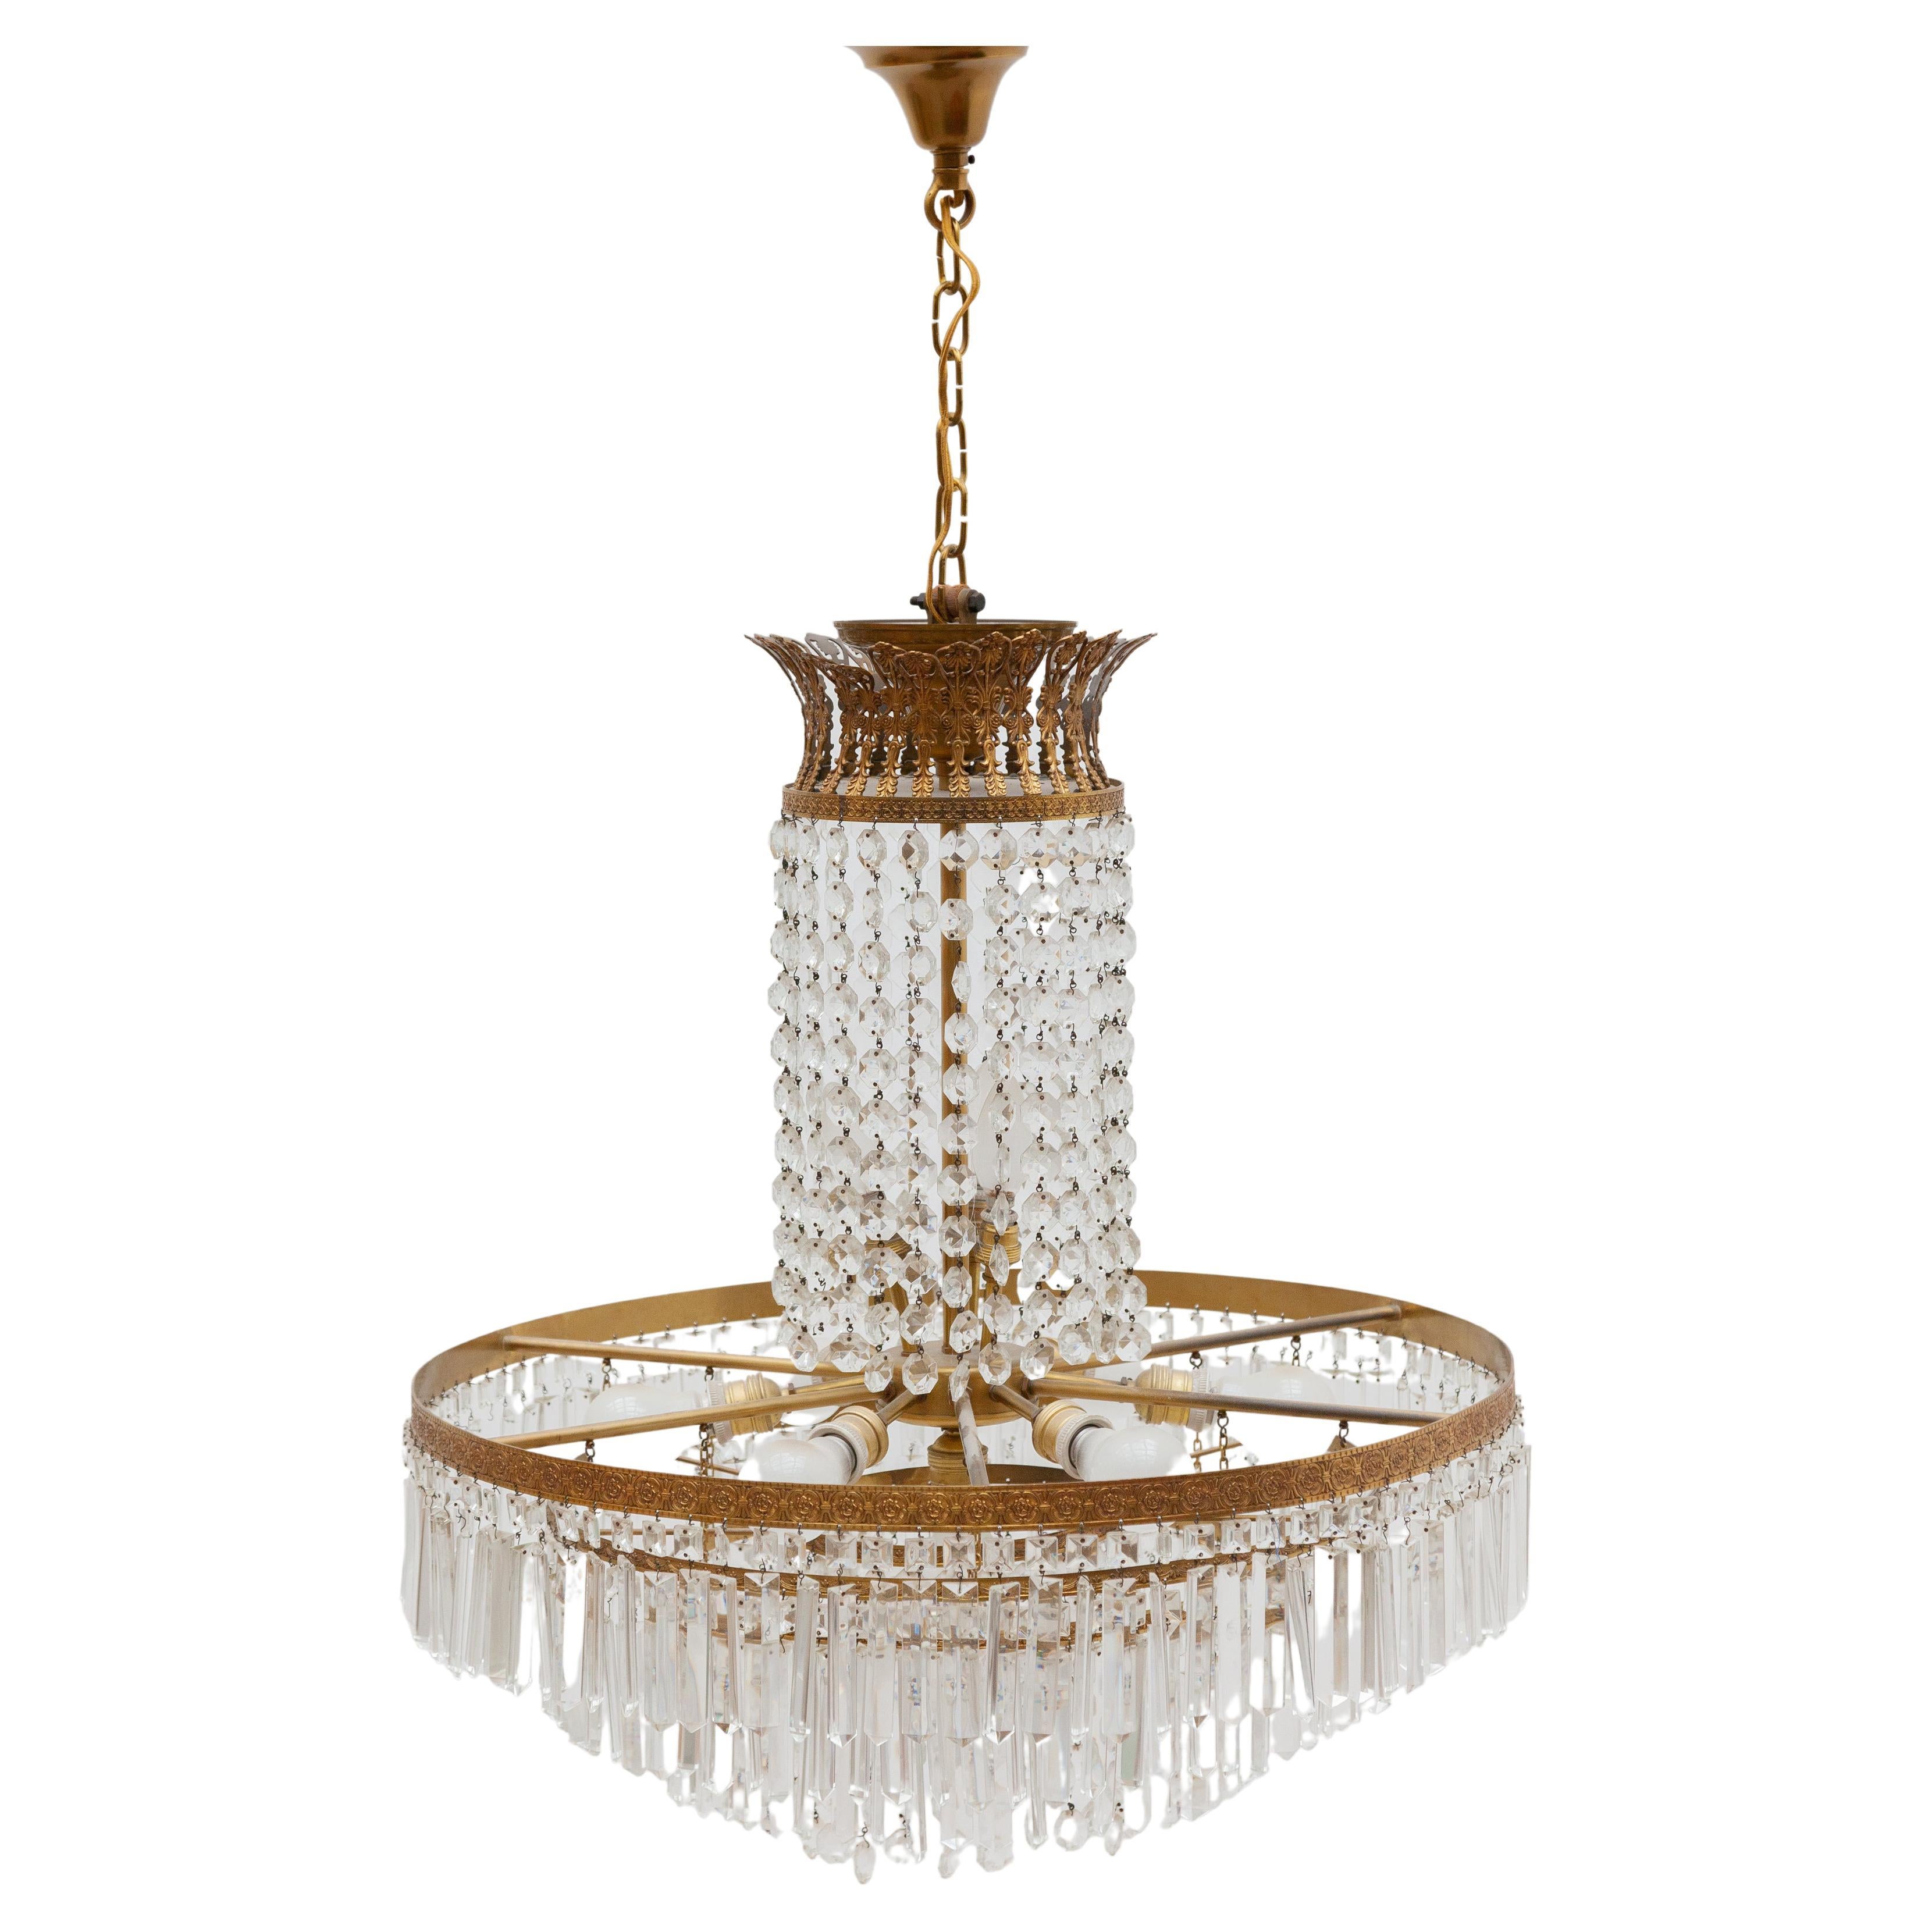 A crystal Victorian style waterfall chandelier with a brass frame in decorated flower pattern with hanging elongated in crystal faceted Murano glasses and diamant faceted round glasses. When the chandelier is lit with the seven bulbs of E27, a